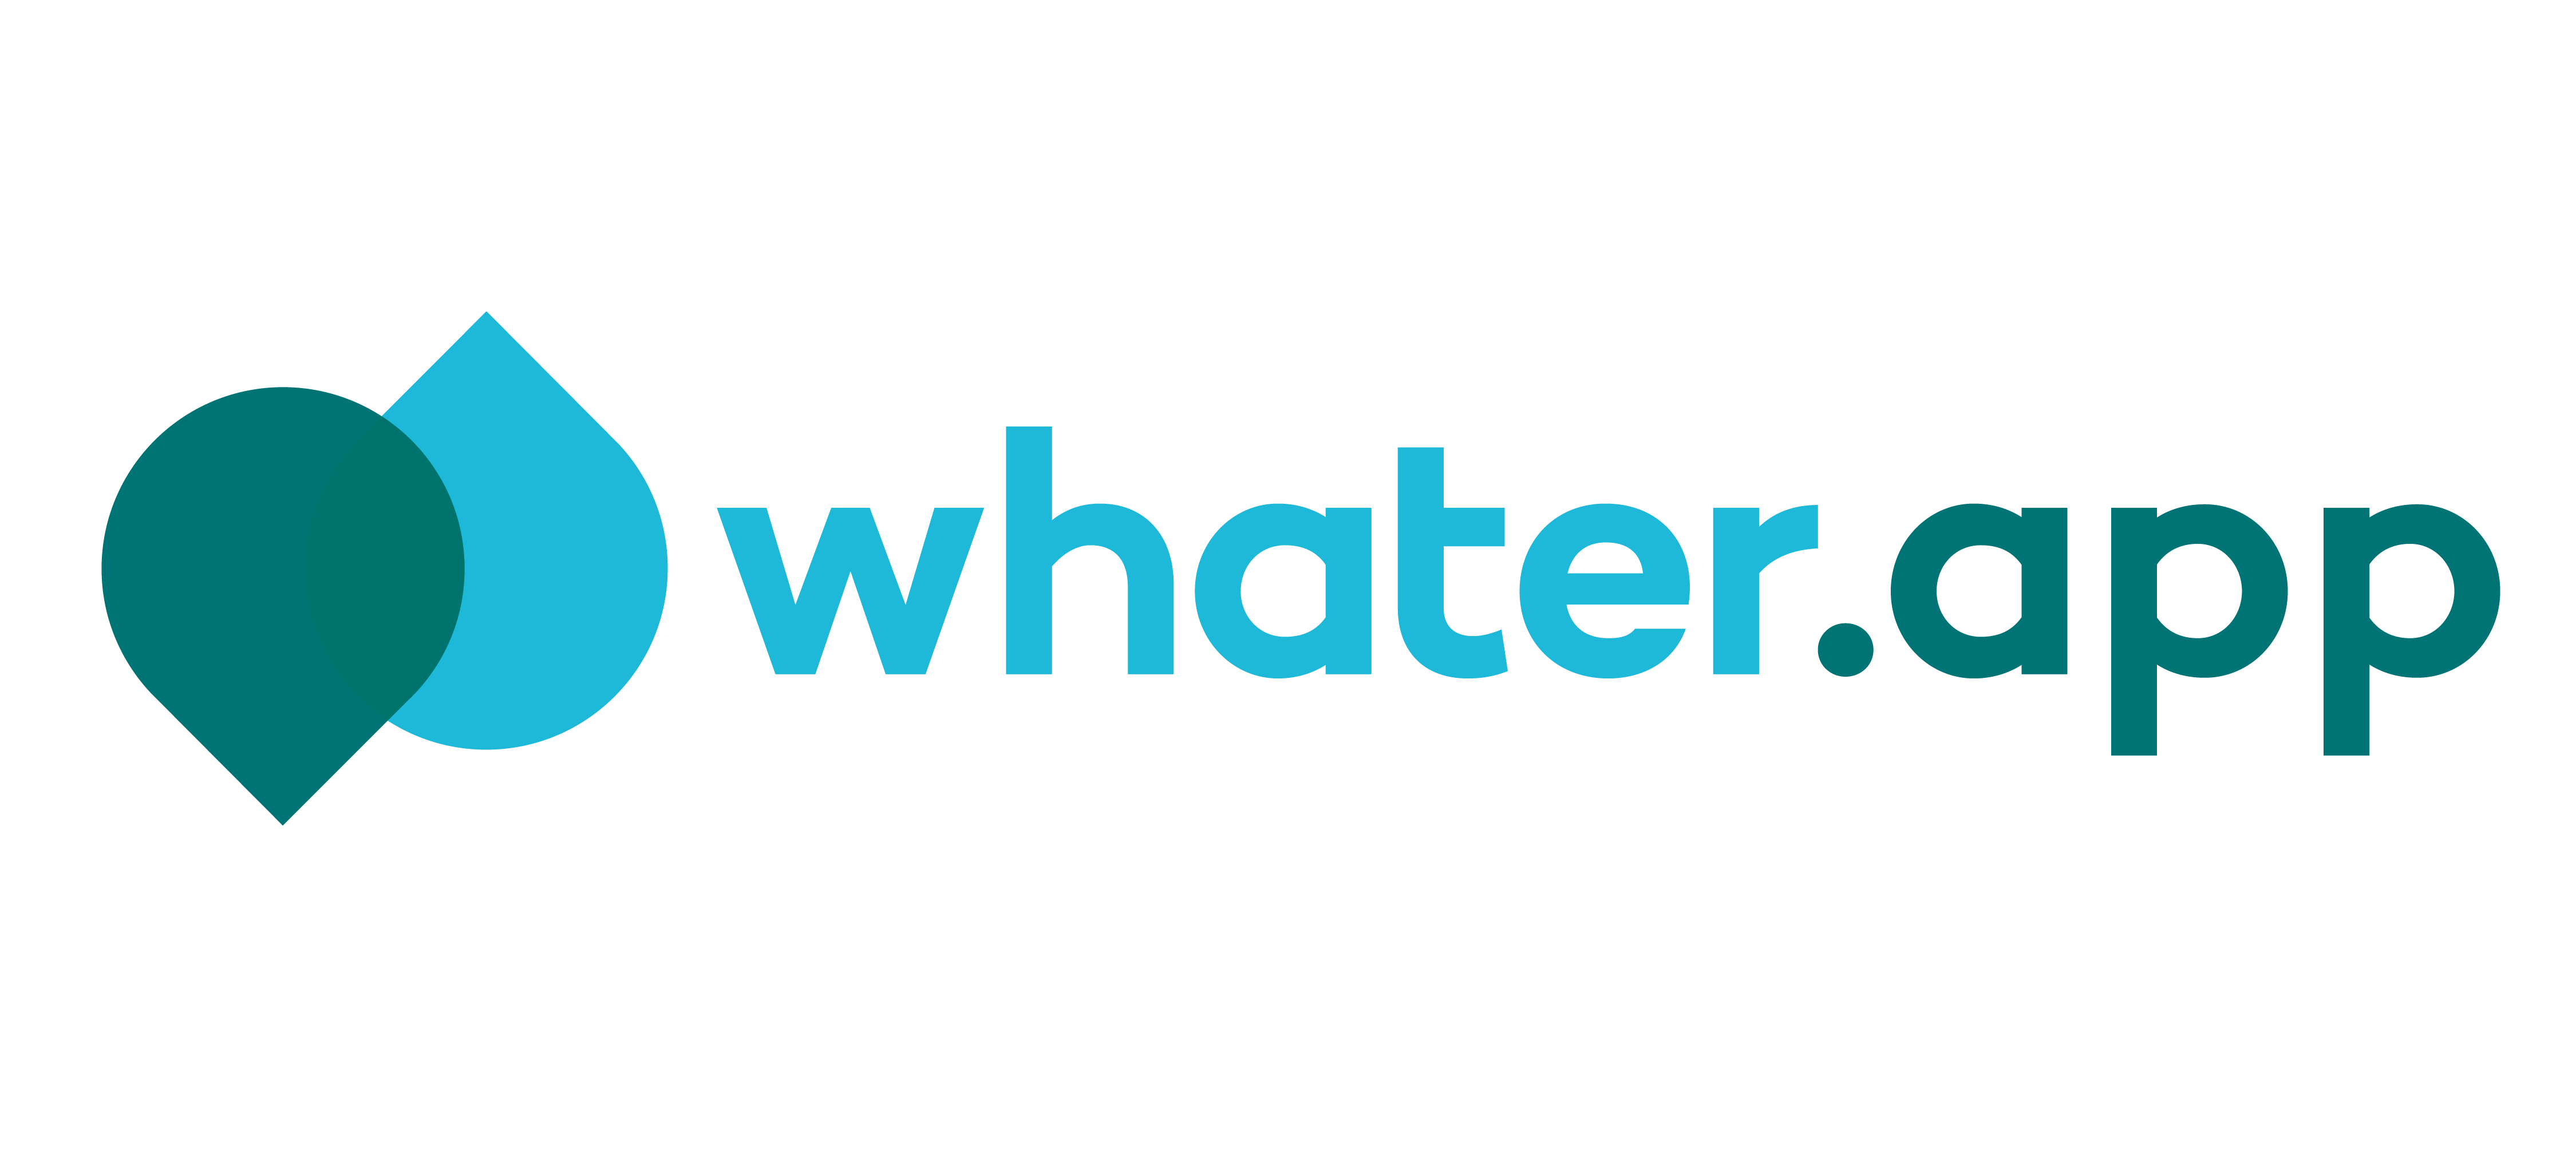 whater.app